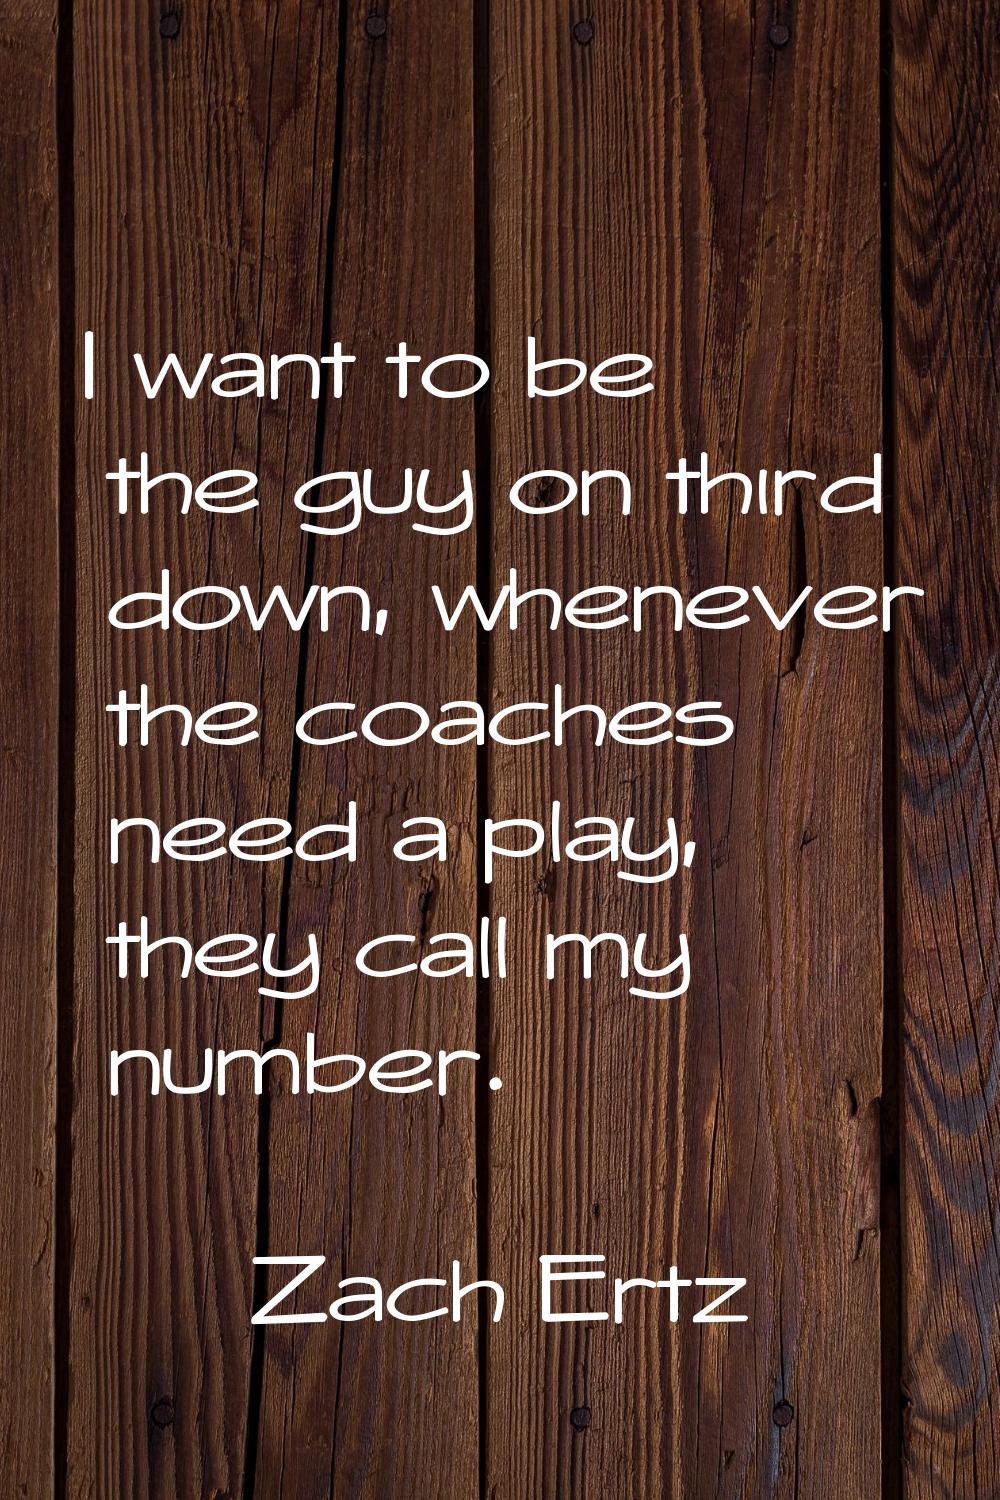 I want to be the guy on third down, whenever the coaches need a play, they call my number.